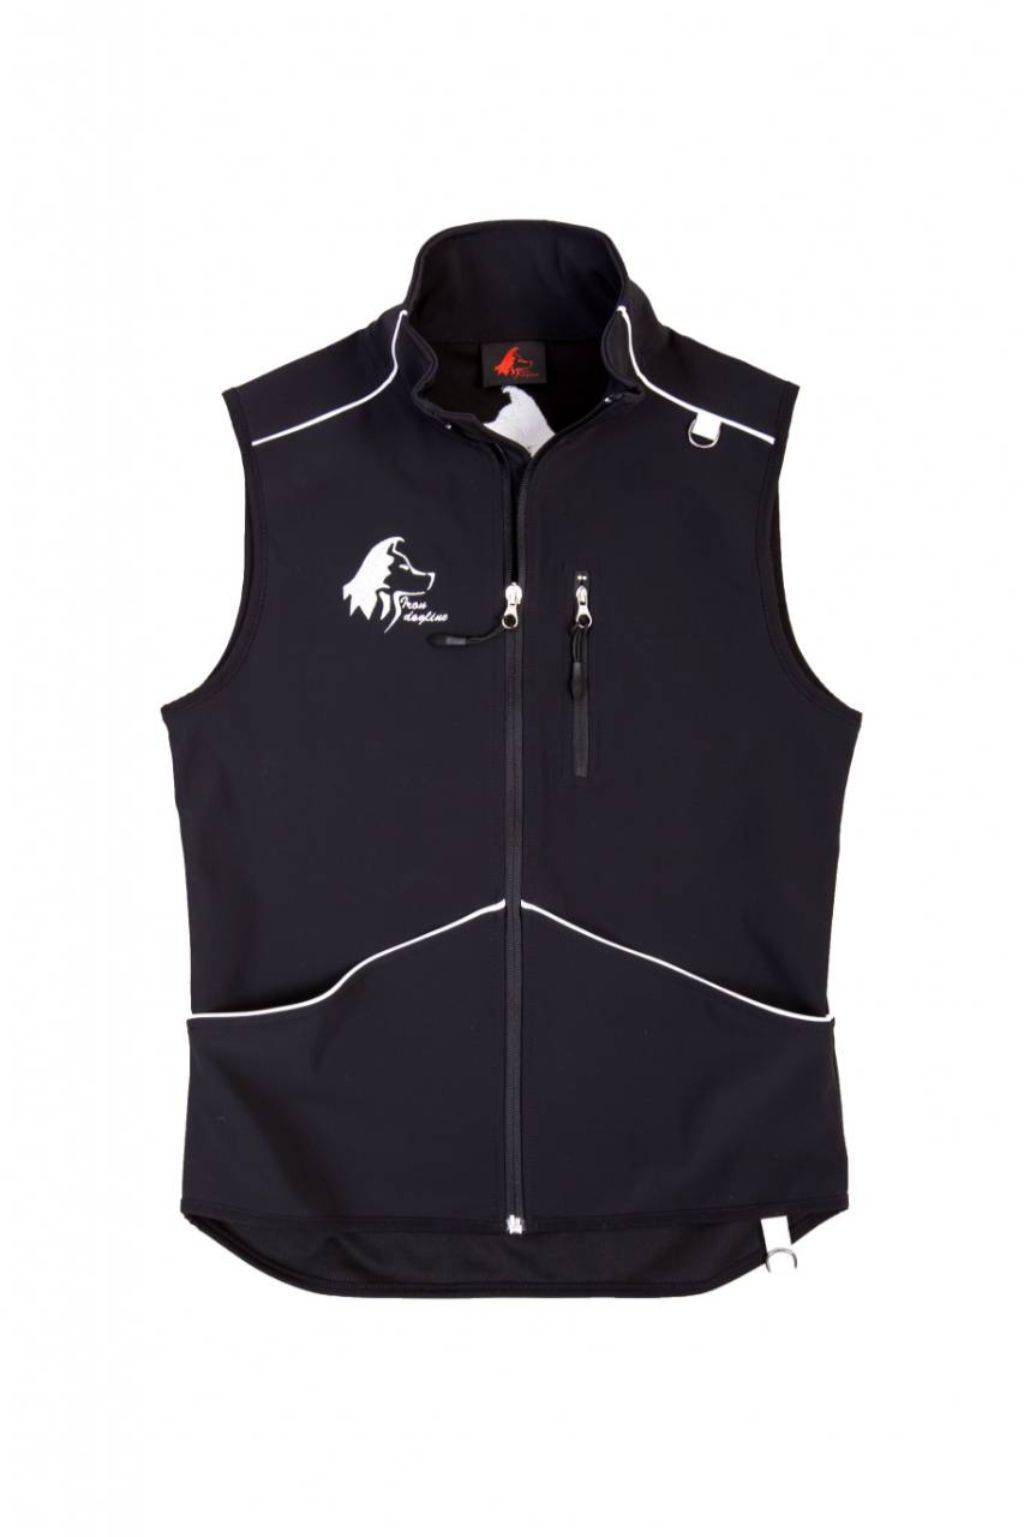 GILET ADDESTRAMENTO INVERNALE unisex Made In Italy